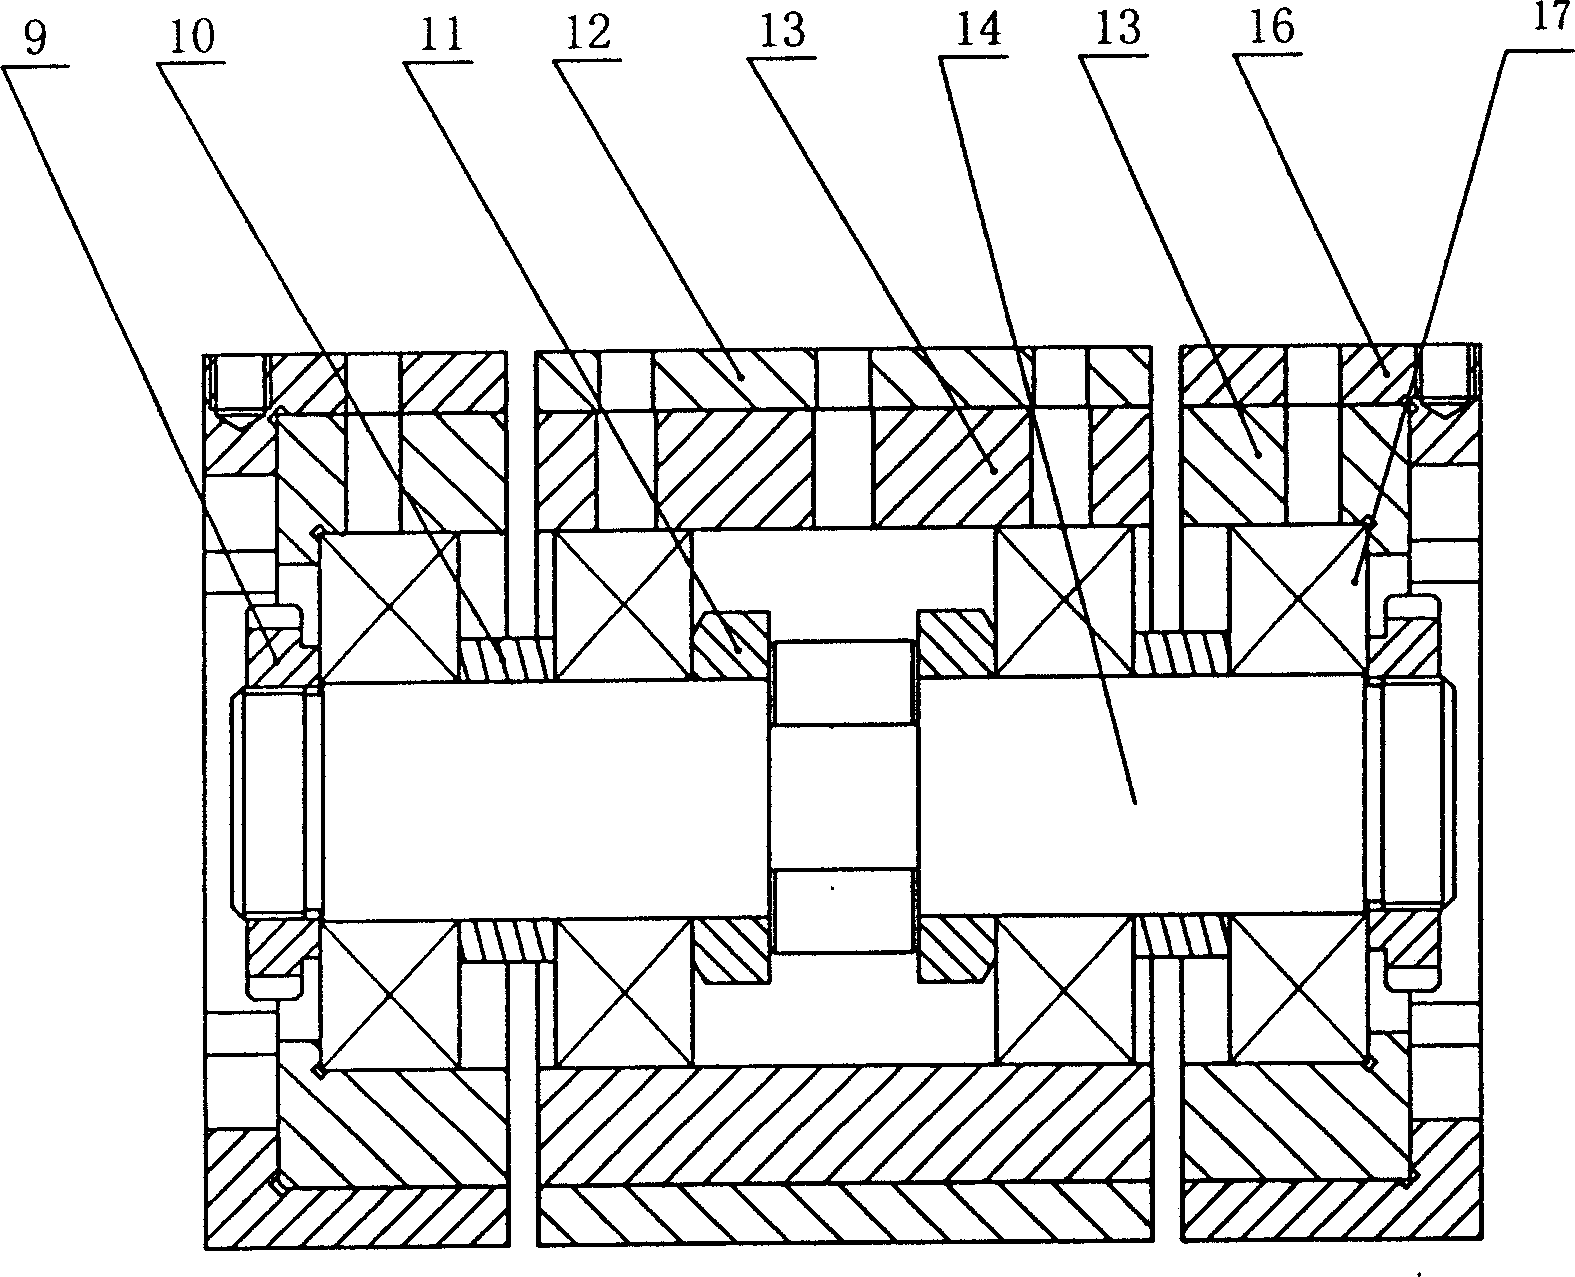 Reinforced test machine for rolling bearing life and reliability and its test method